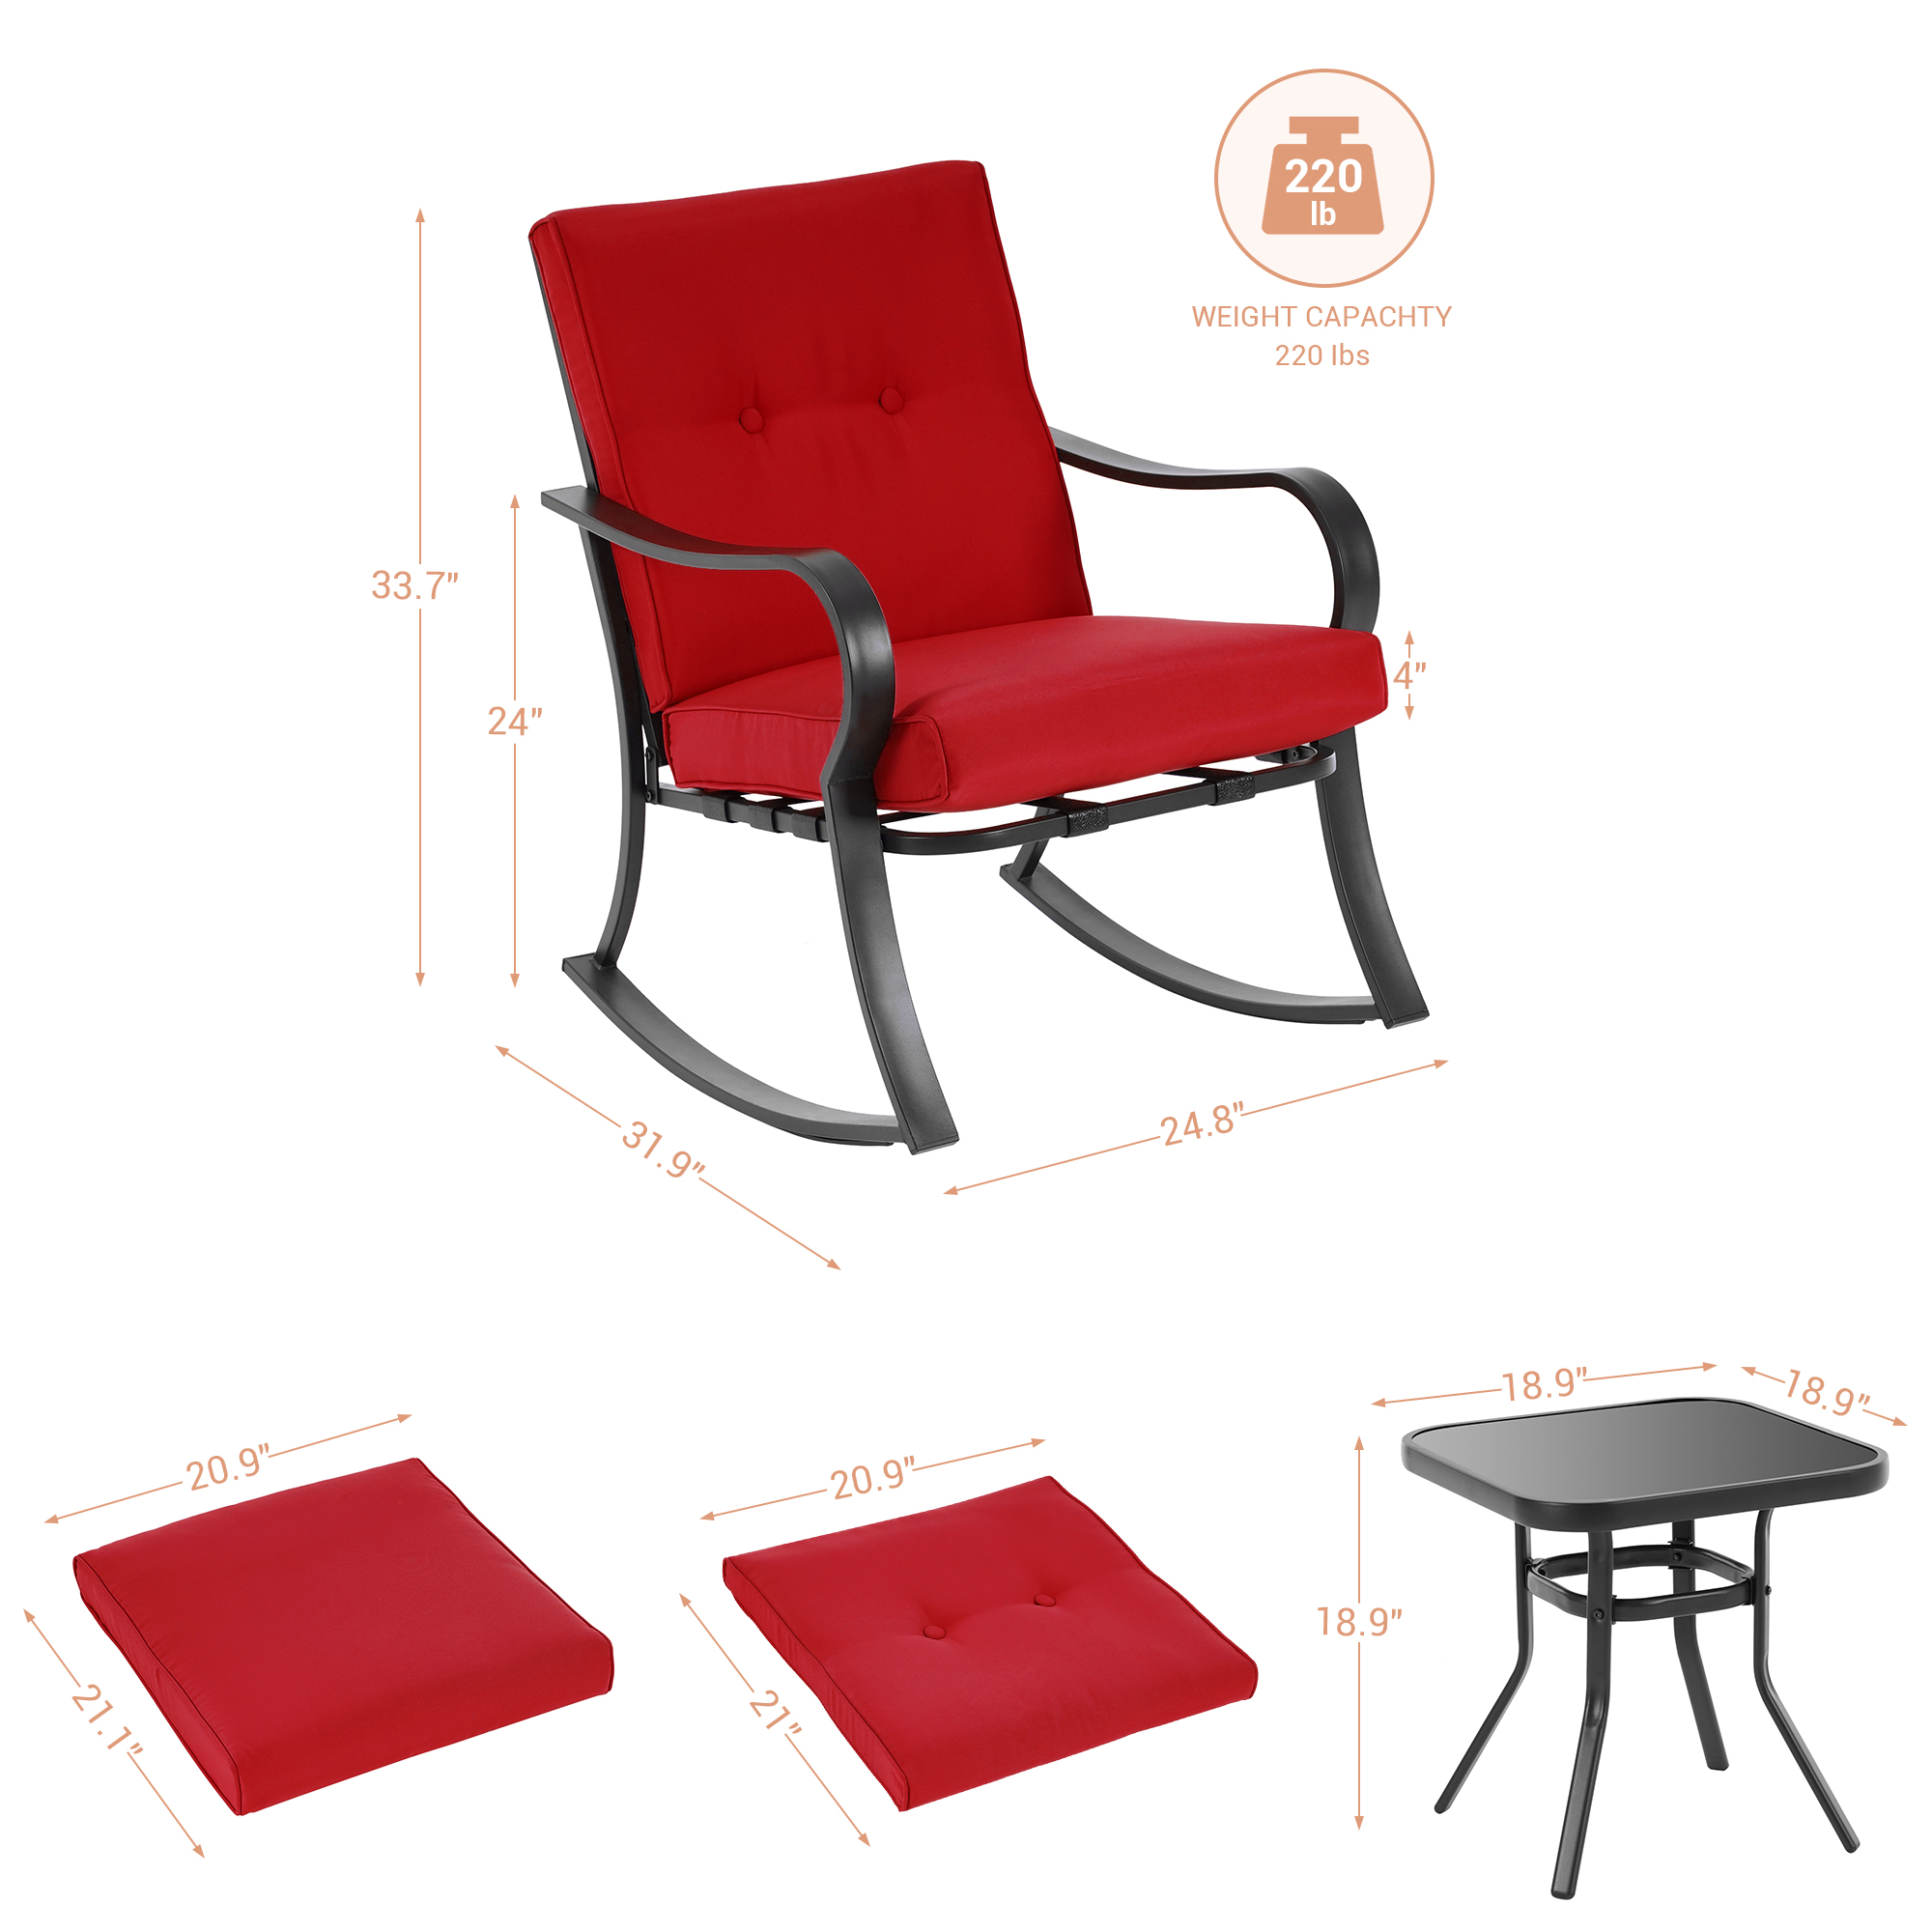 Outdoor Lounge Chair Courtyard Rocking Chair 3-Piece Steel Frame Outdoor Furniture Sets Thick Cushion Red Double Armchair Deck Backyard Bistro Set - image 3 of 8